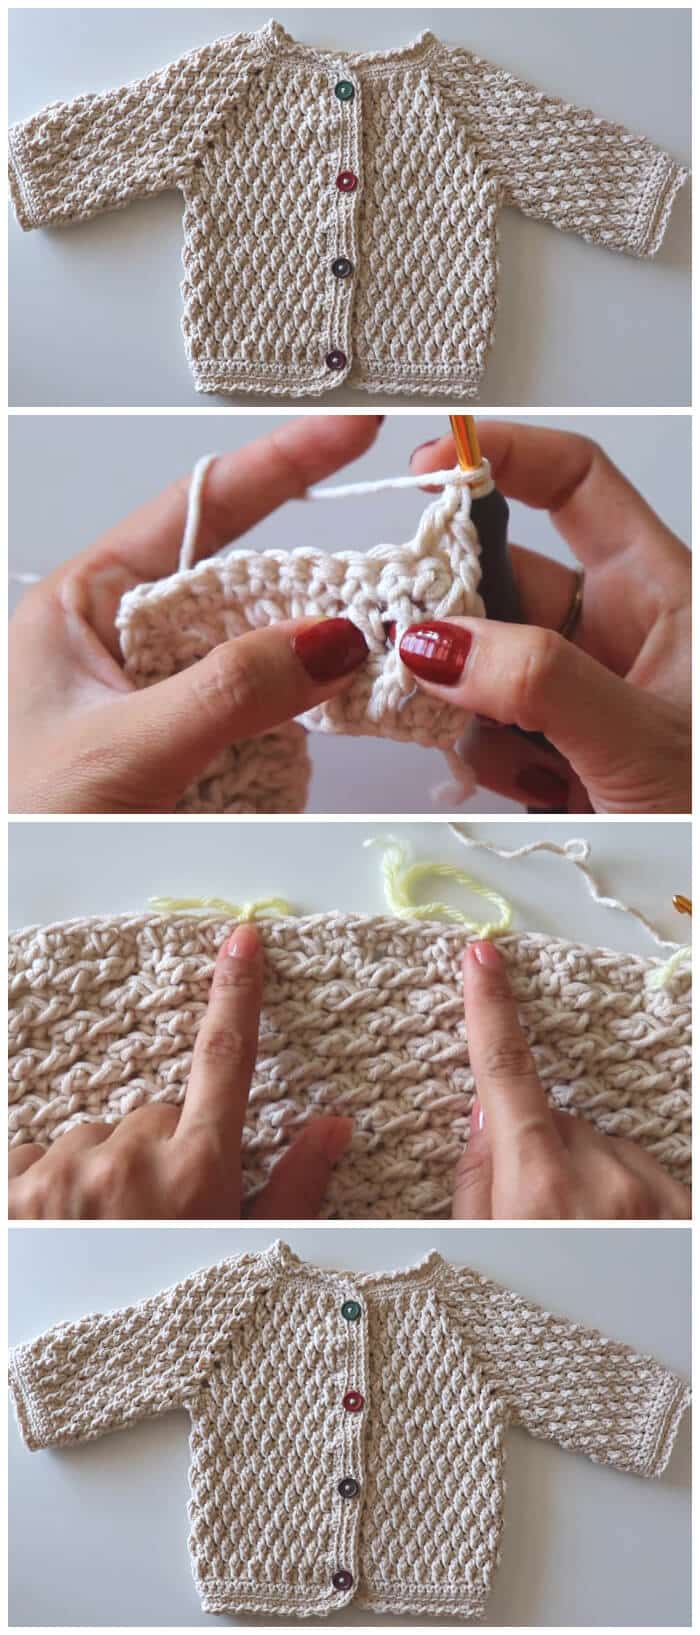 Crochet Alpine Stitch Baby Cardigan can be worn by little boys and little girls; just use the appropriate crochet colors. The simplicity of the design makes it an elegant one, but you can add embellishments if you wish. 